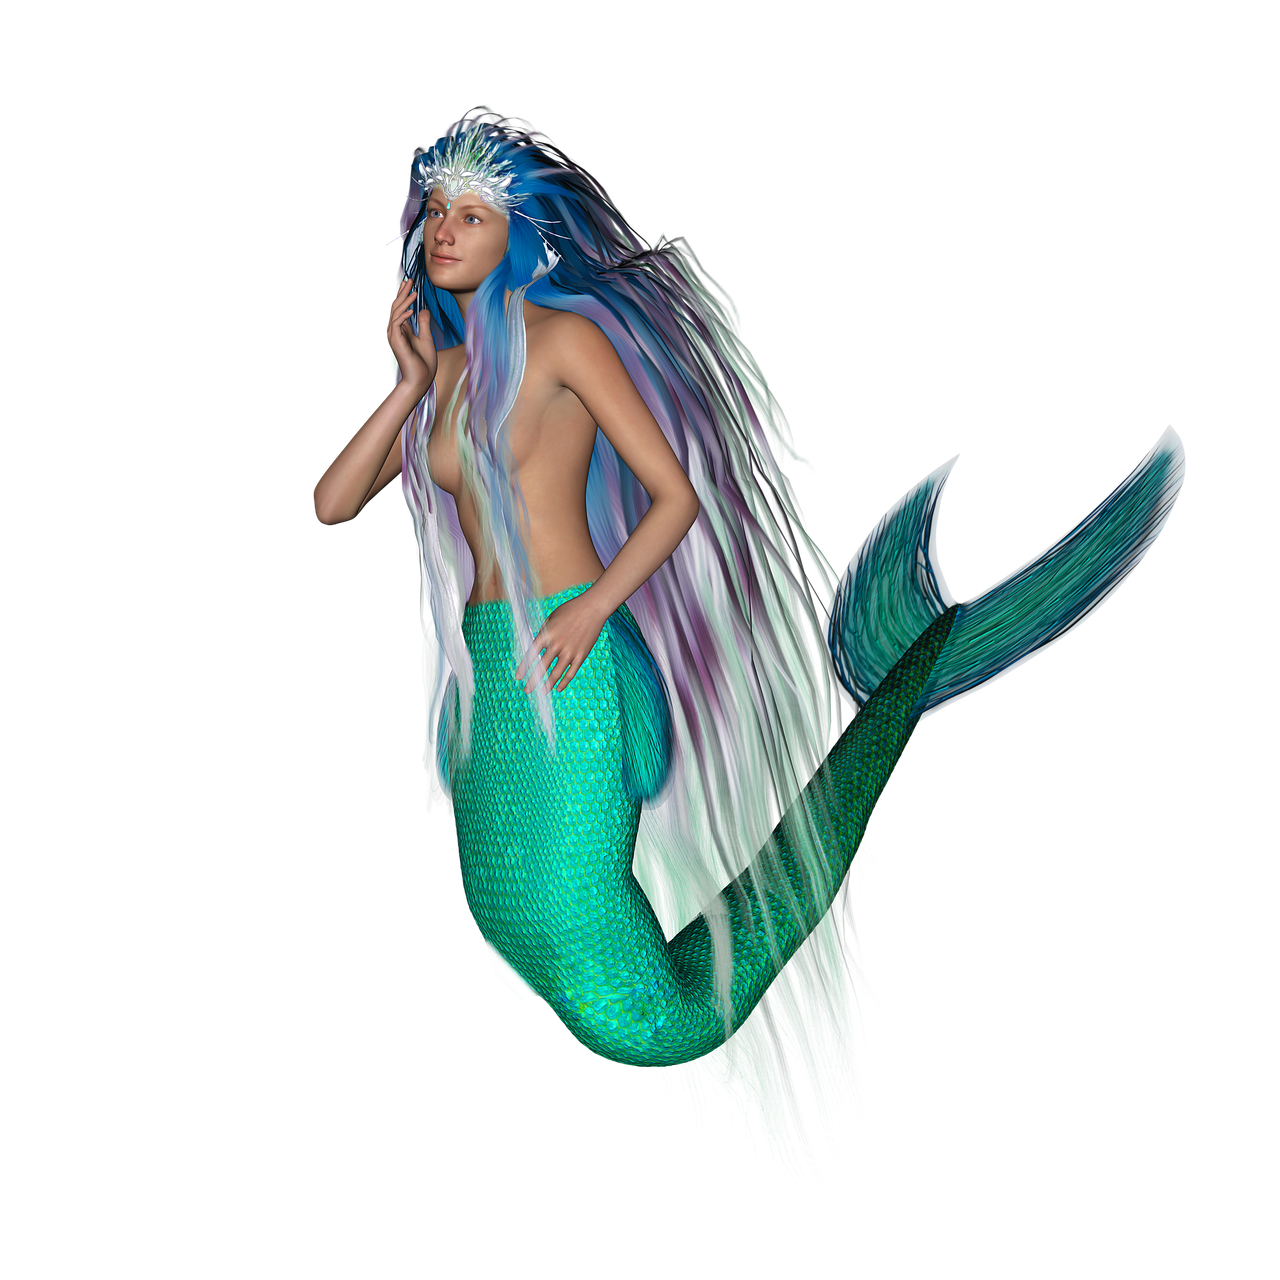 a woman in a mermaid costume talking on a cell phone, a raytraced image, trending on cg society, digital art, on a black background, fiberoptic hair, ultra realistic 3d illustration, fiber optic hair